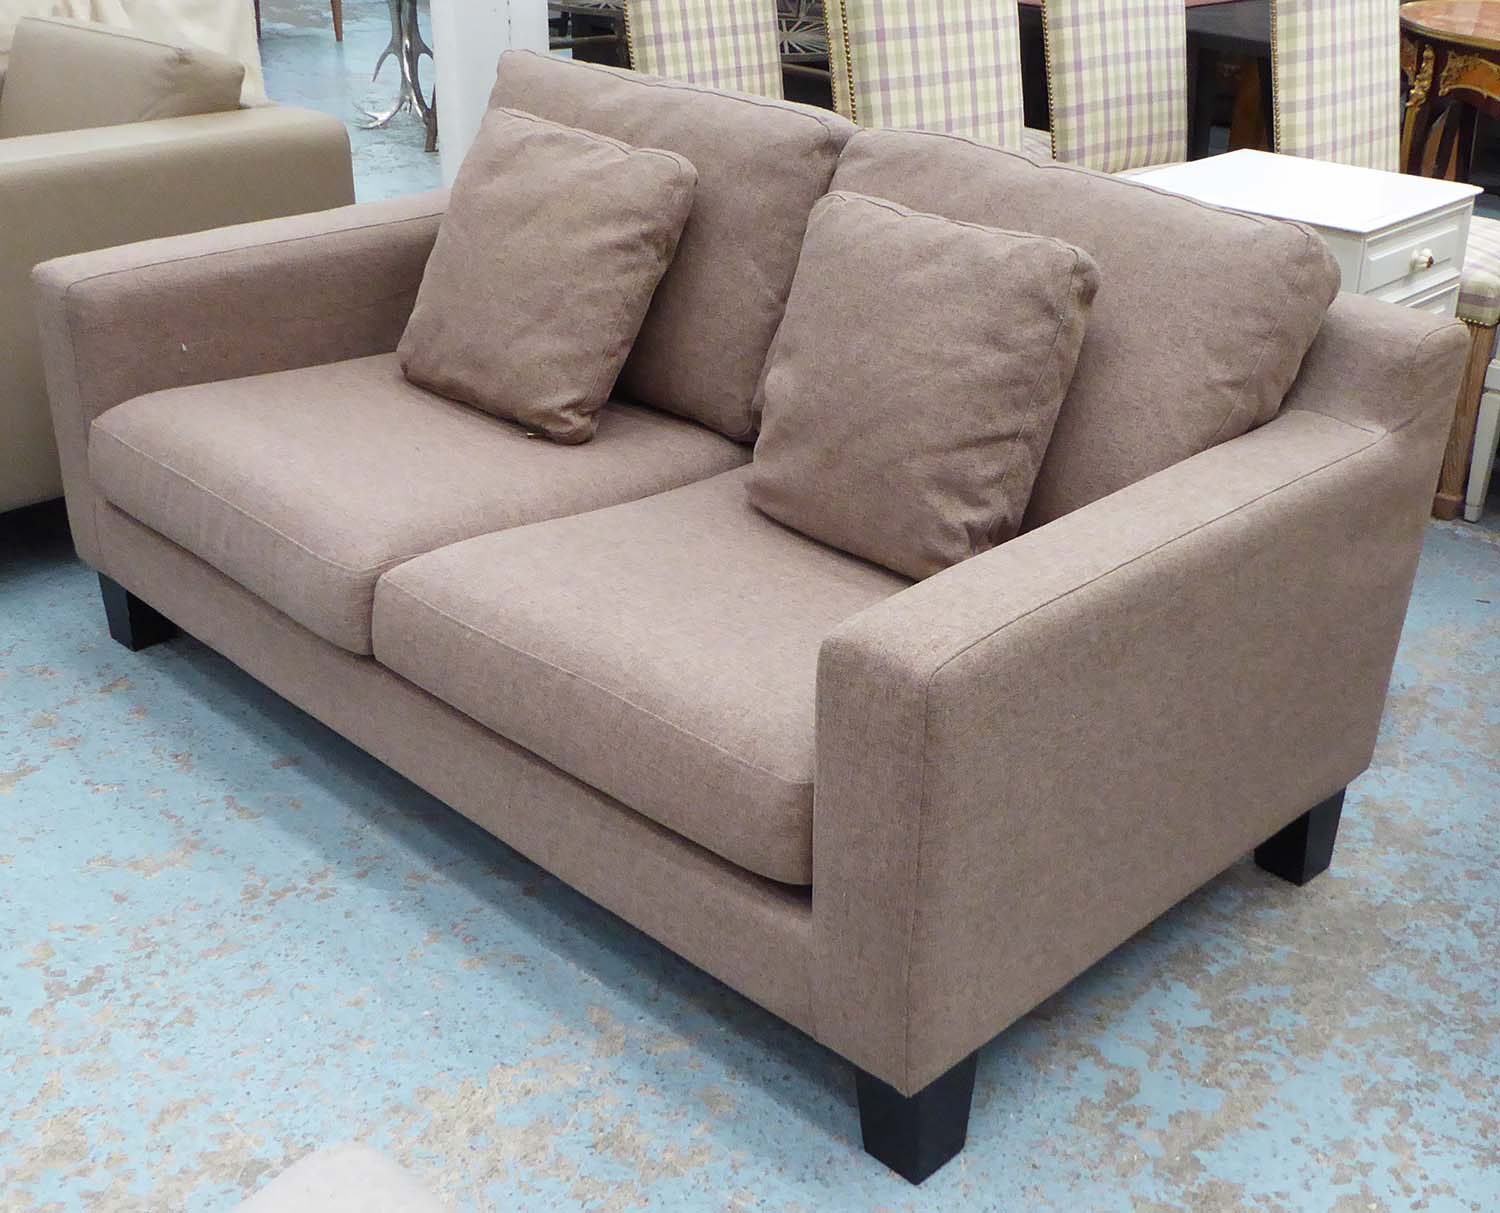 dwell sofa bed chairs